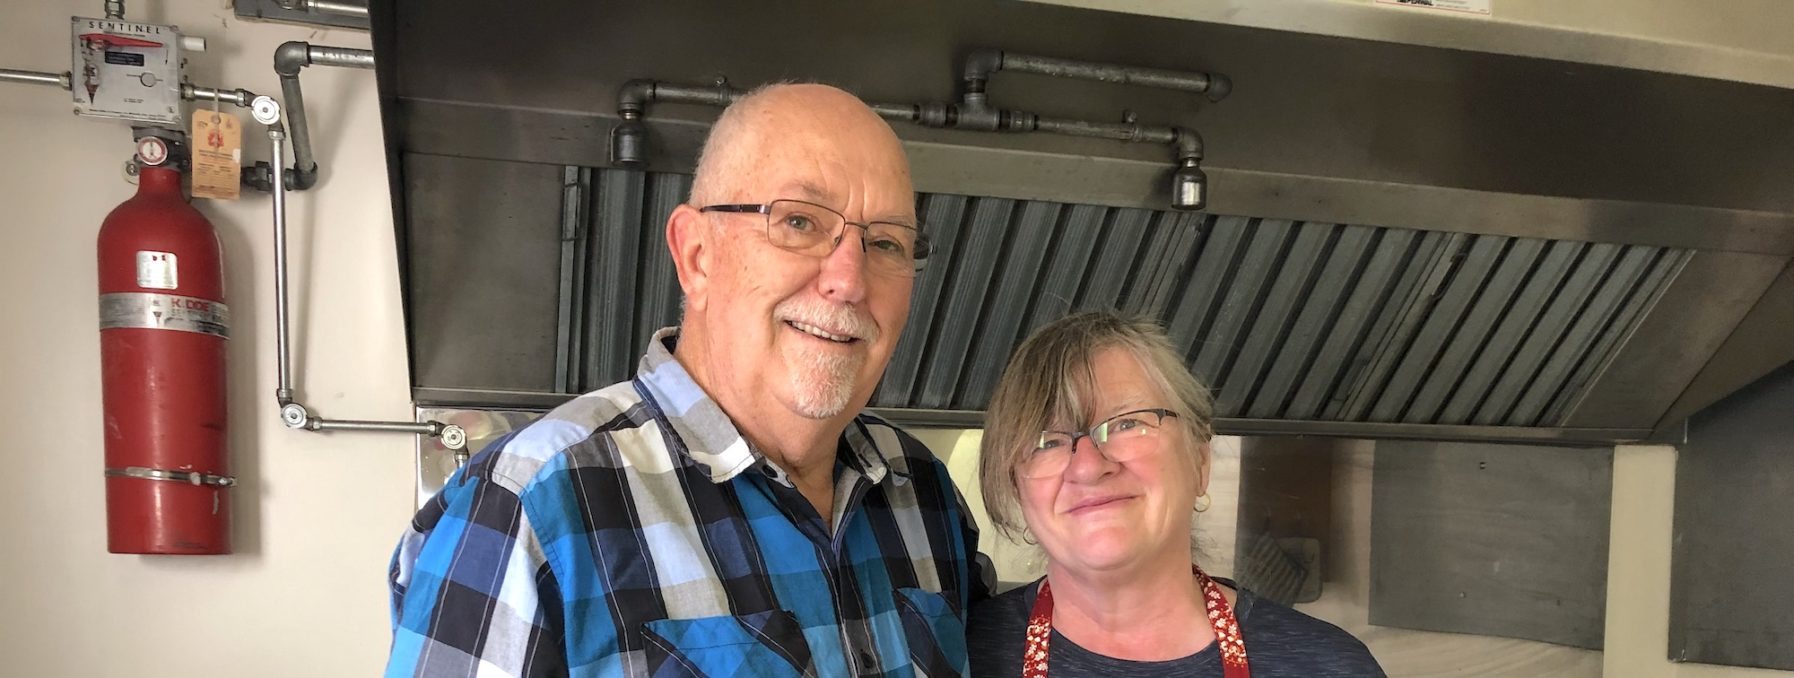 Helmut and Karin Hein pose for a picture inside of an MDS project kitchen.